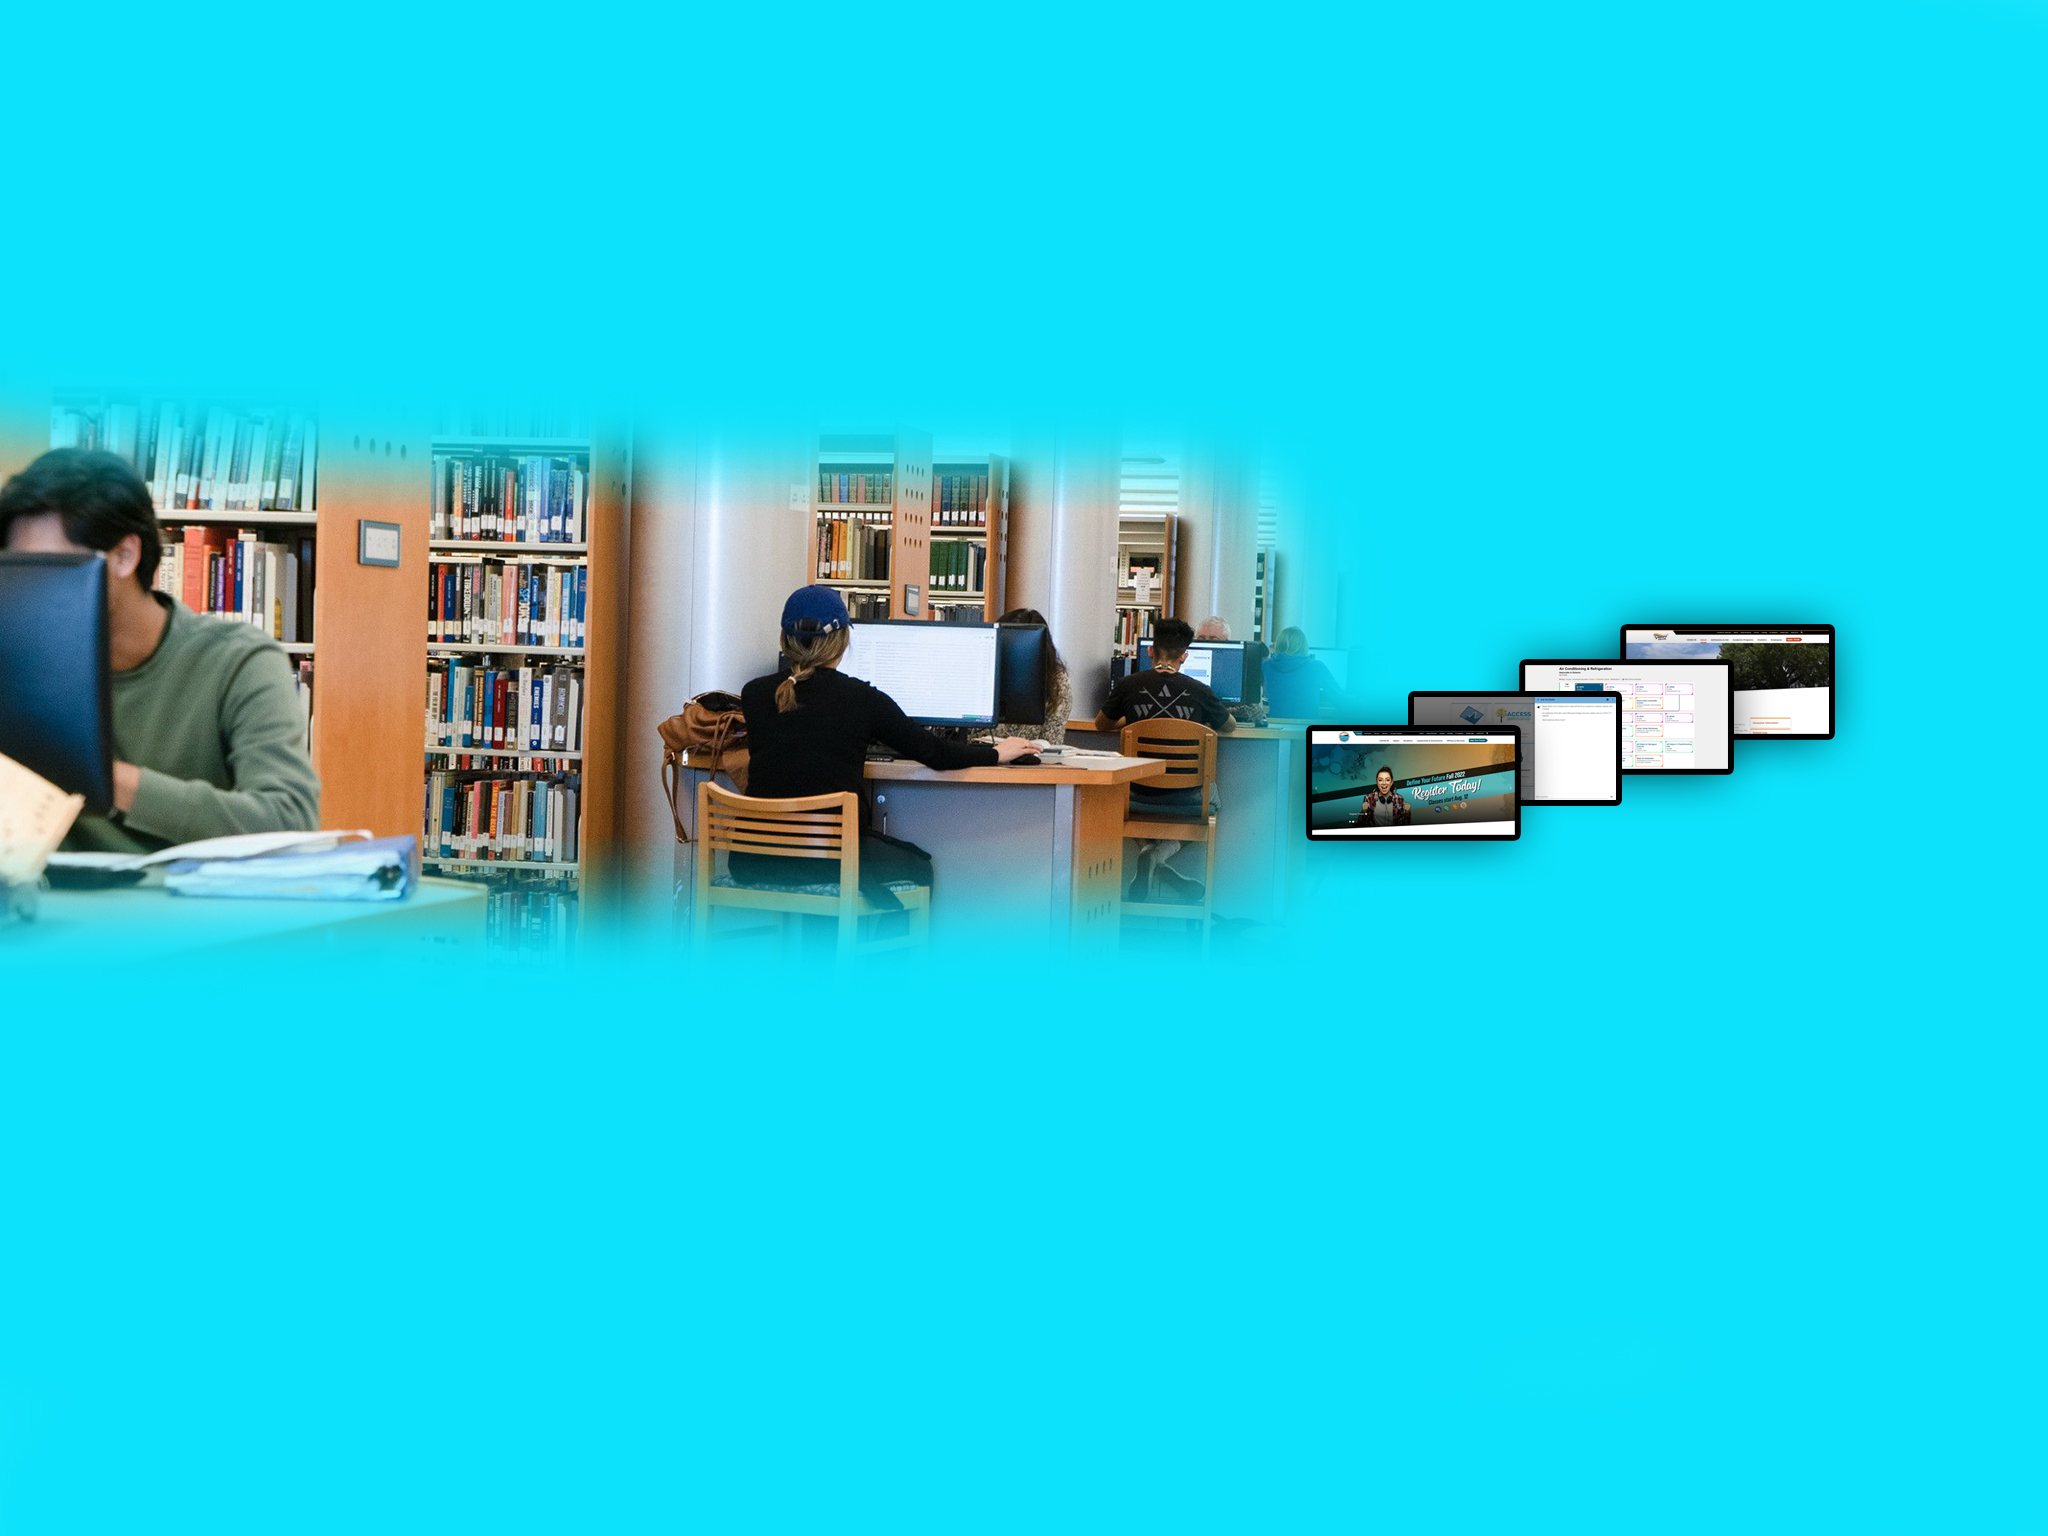 Image of Students at Computers surfing the web in the Library, next to screenshots of our websites, online tools and resources